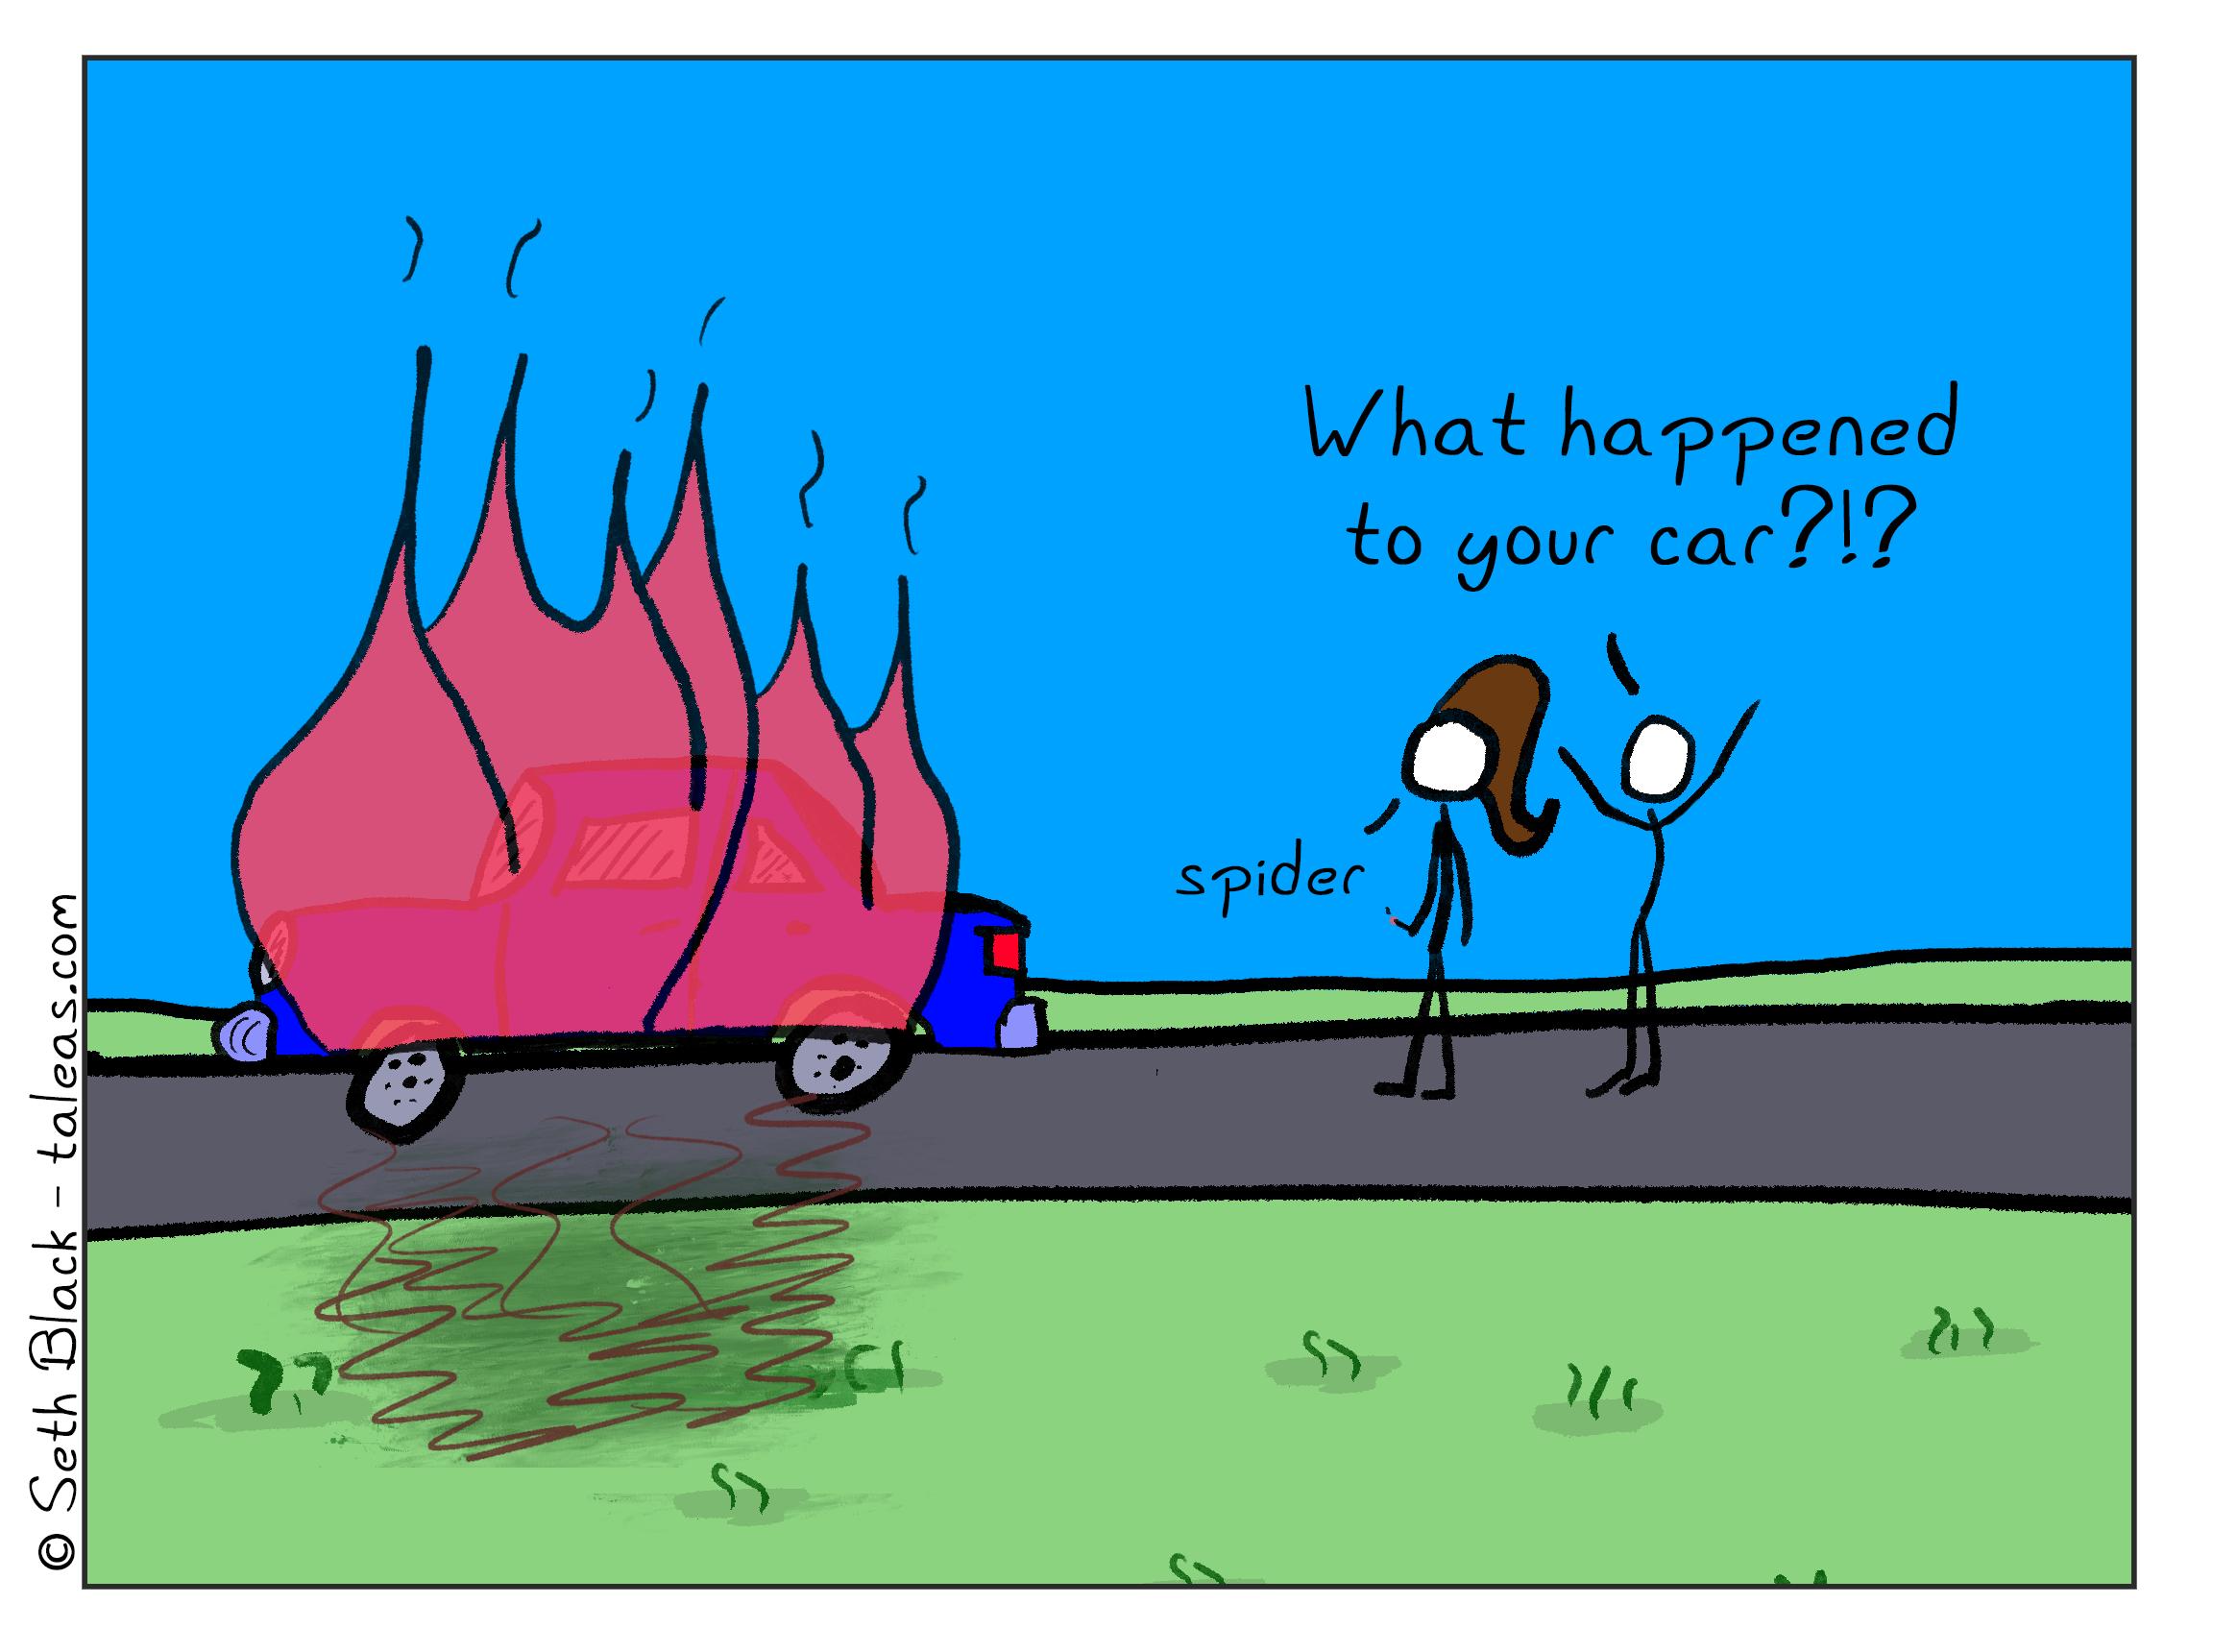 A burning car rests in the middle of a road while two stick figures look on. One stick figure exclaims, "What happened to your car!?!" to which the other stick figure who is holding a match replies, "spider".